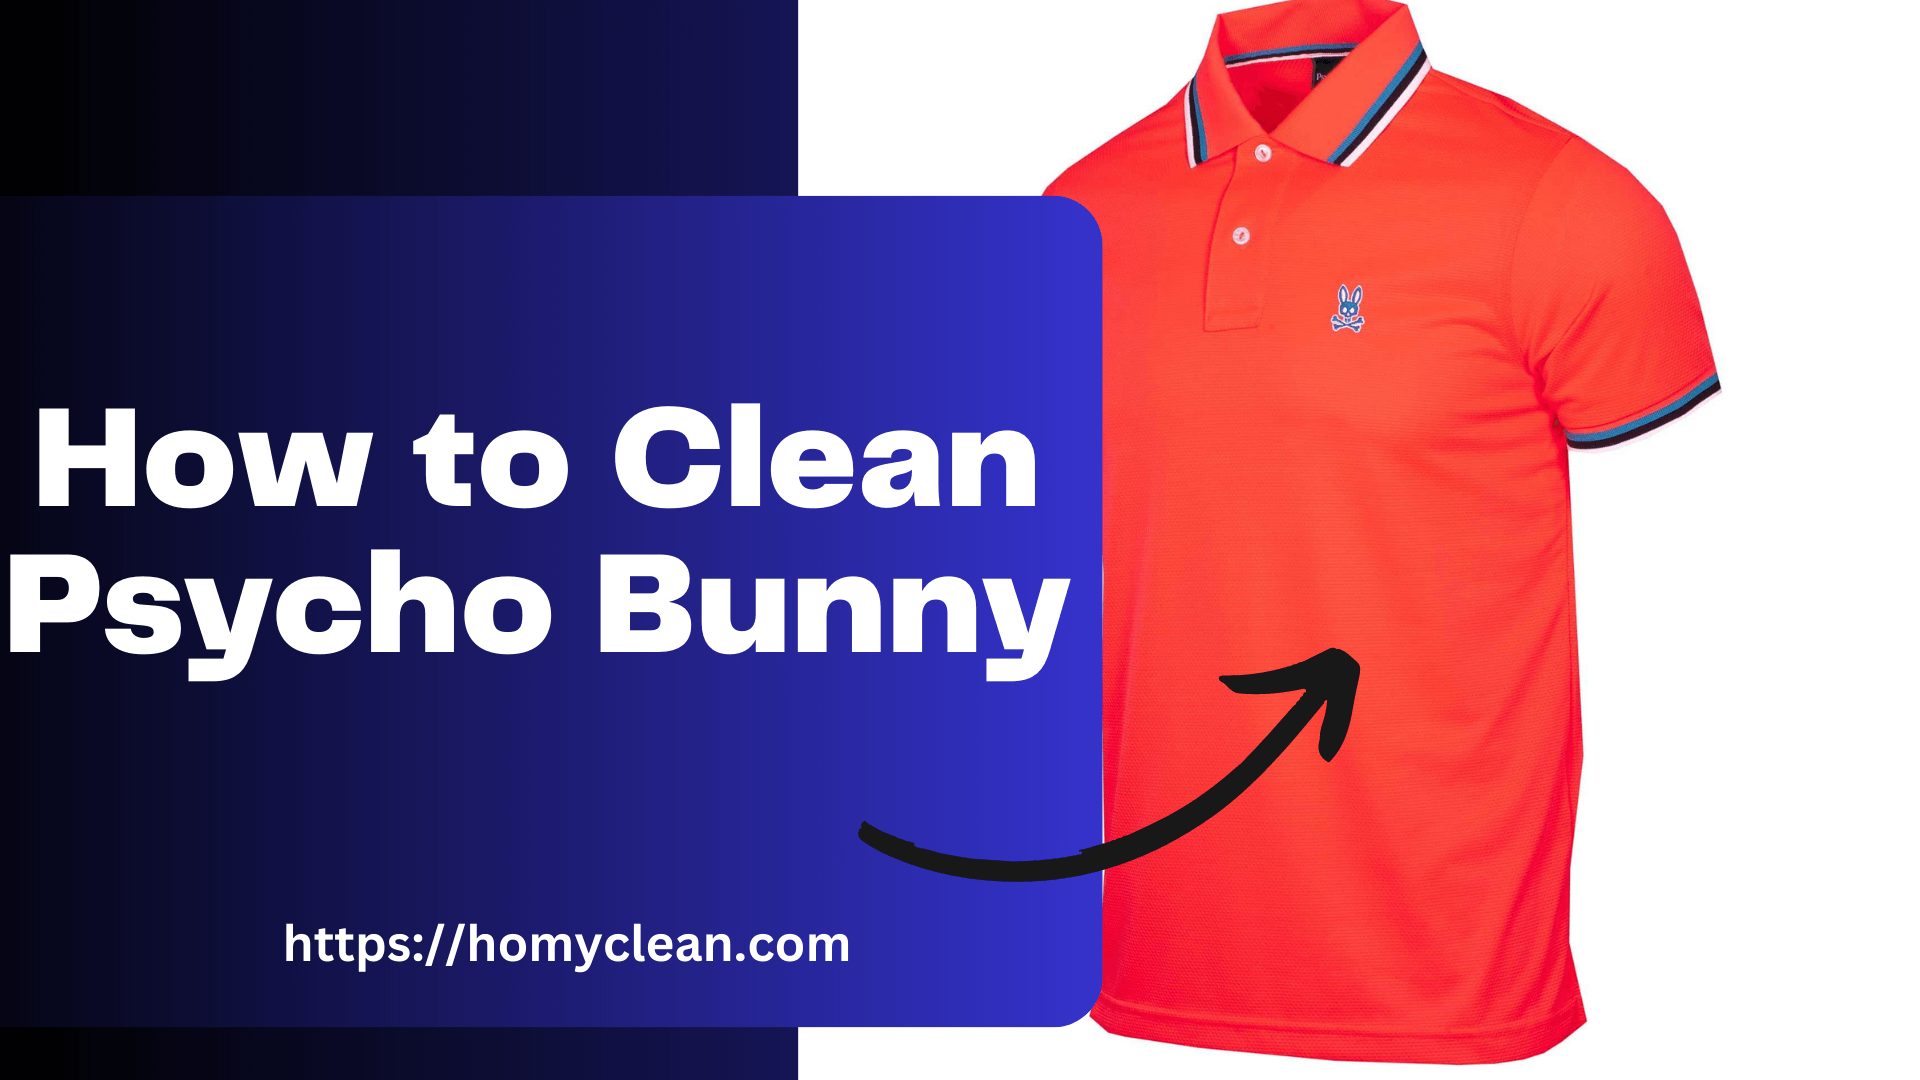 How to Clean Psycho Bunny: 4 Easy Simple Steps